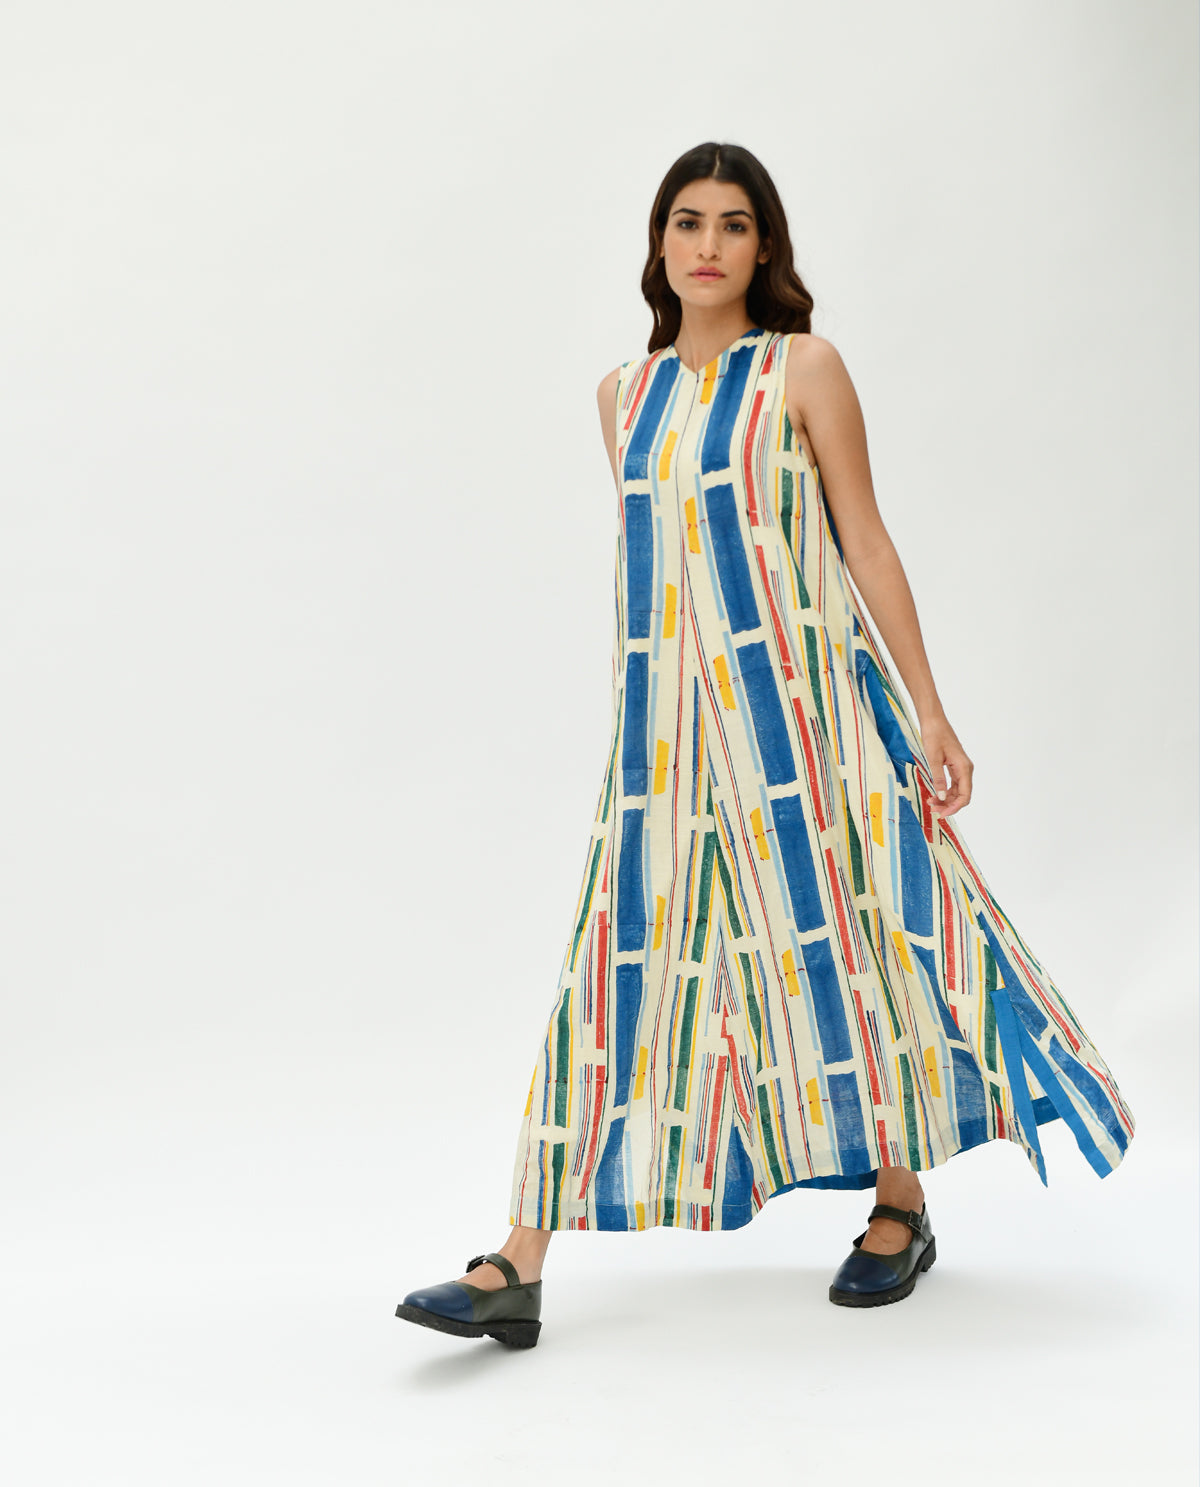 Multicolor Printed Stripes Maxi Dress at Kamakhyaa by Rias Jaipur. This item is 100% Organic Cotton, Casual Wear, Handblock Printed, Handspun, Handwoven, Maxi Dresses, Off-White, Relaxed Fit, Sleeveless Dresses, Stellar Print, Stripes, Void, Womenswear